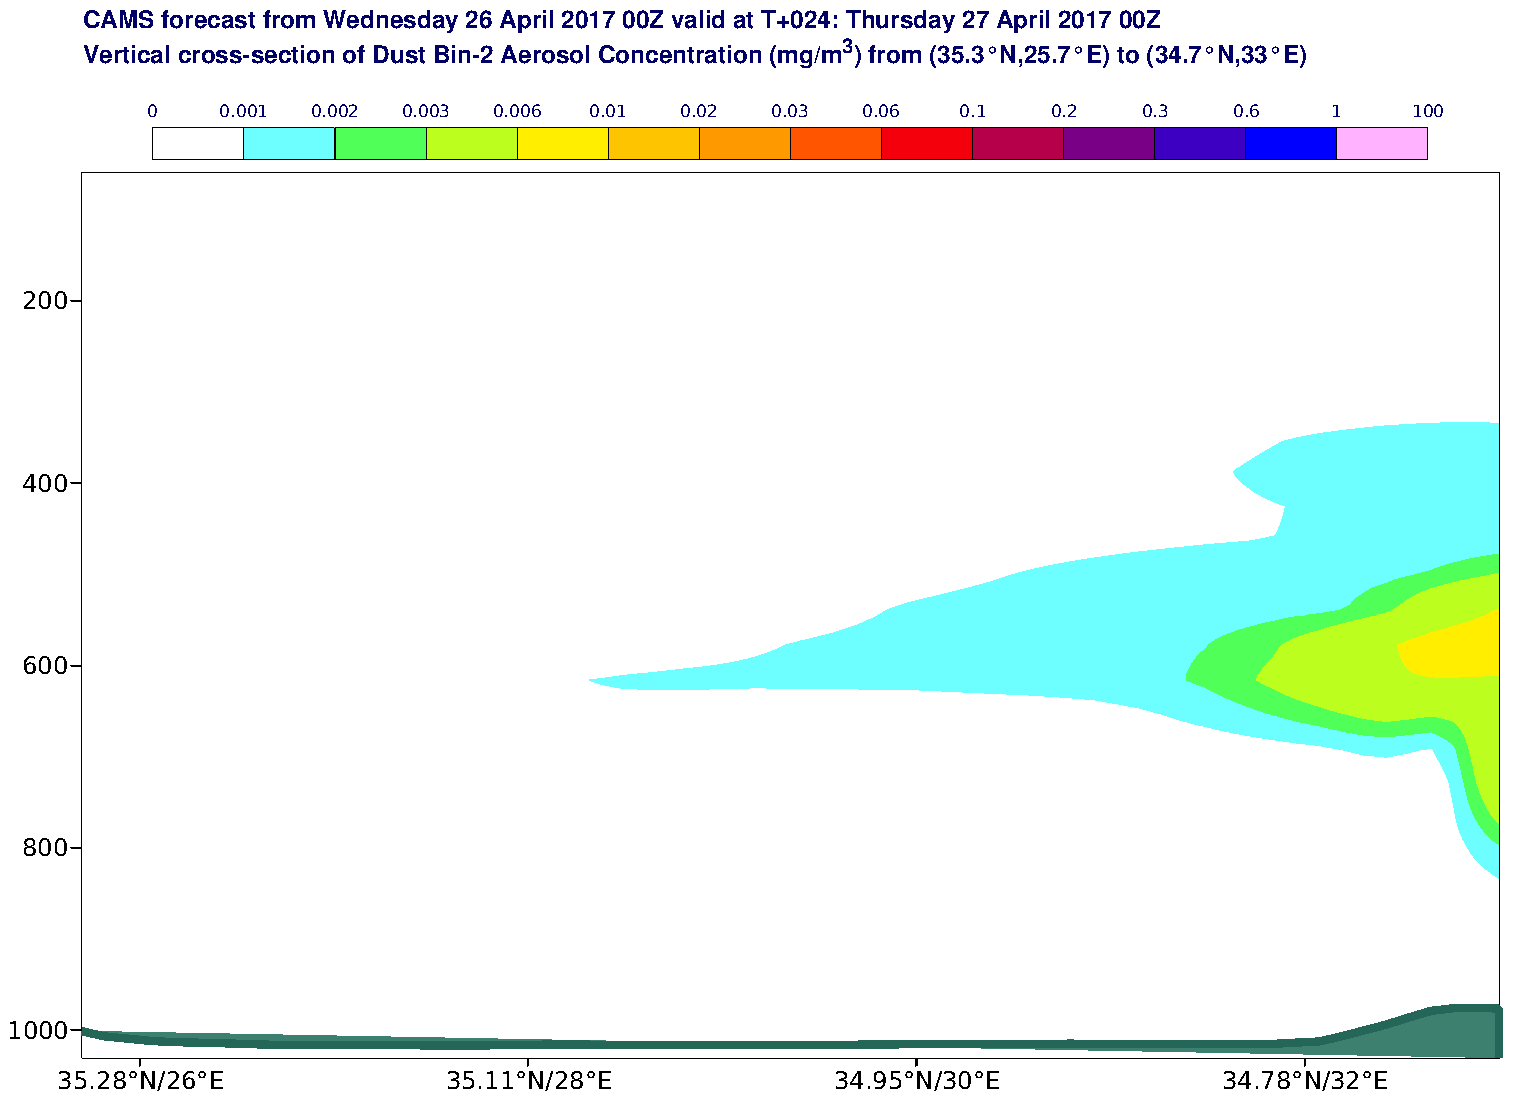 Vertical cross-section of Dust Bin-2 Aerosol Concentration (mg/m3) valid at T24 - 2017-04-27 00:00